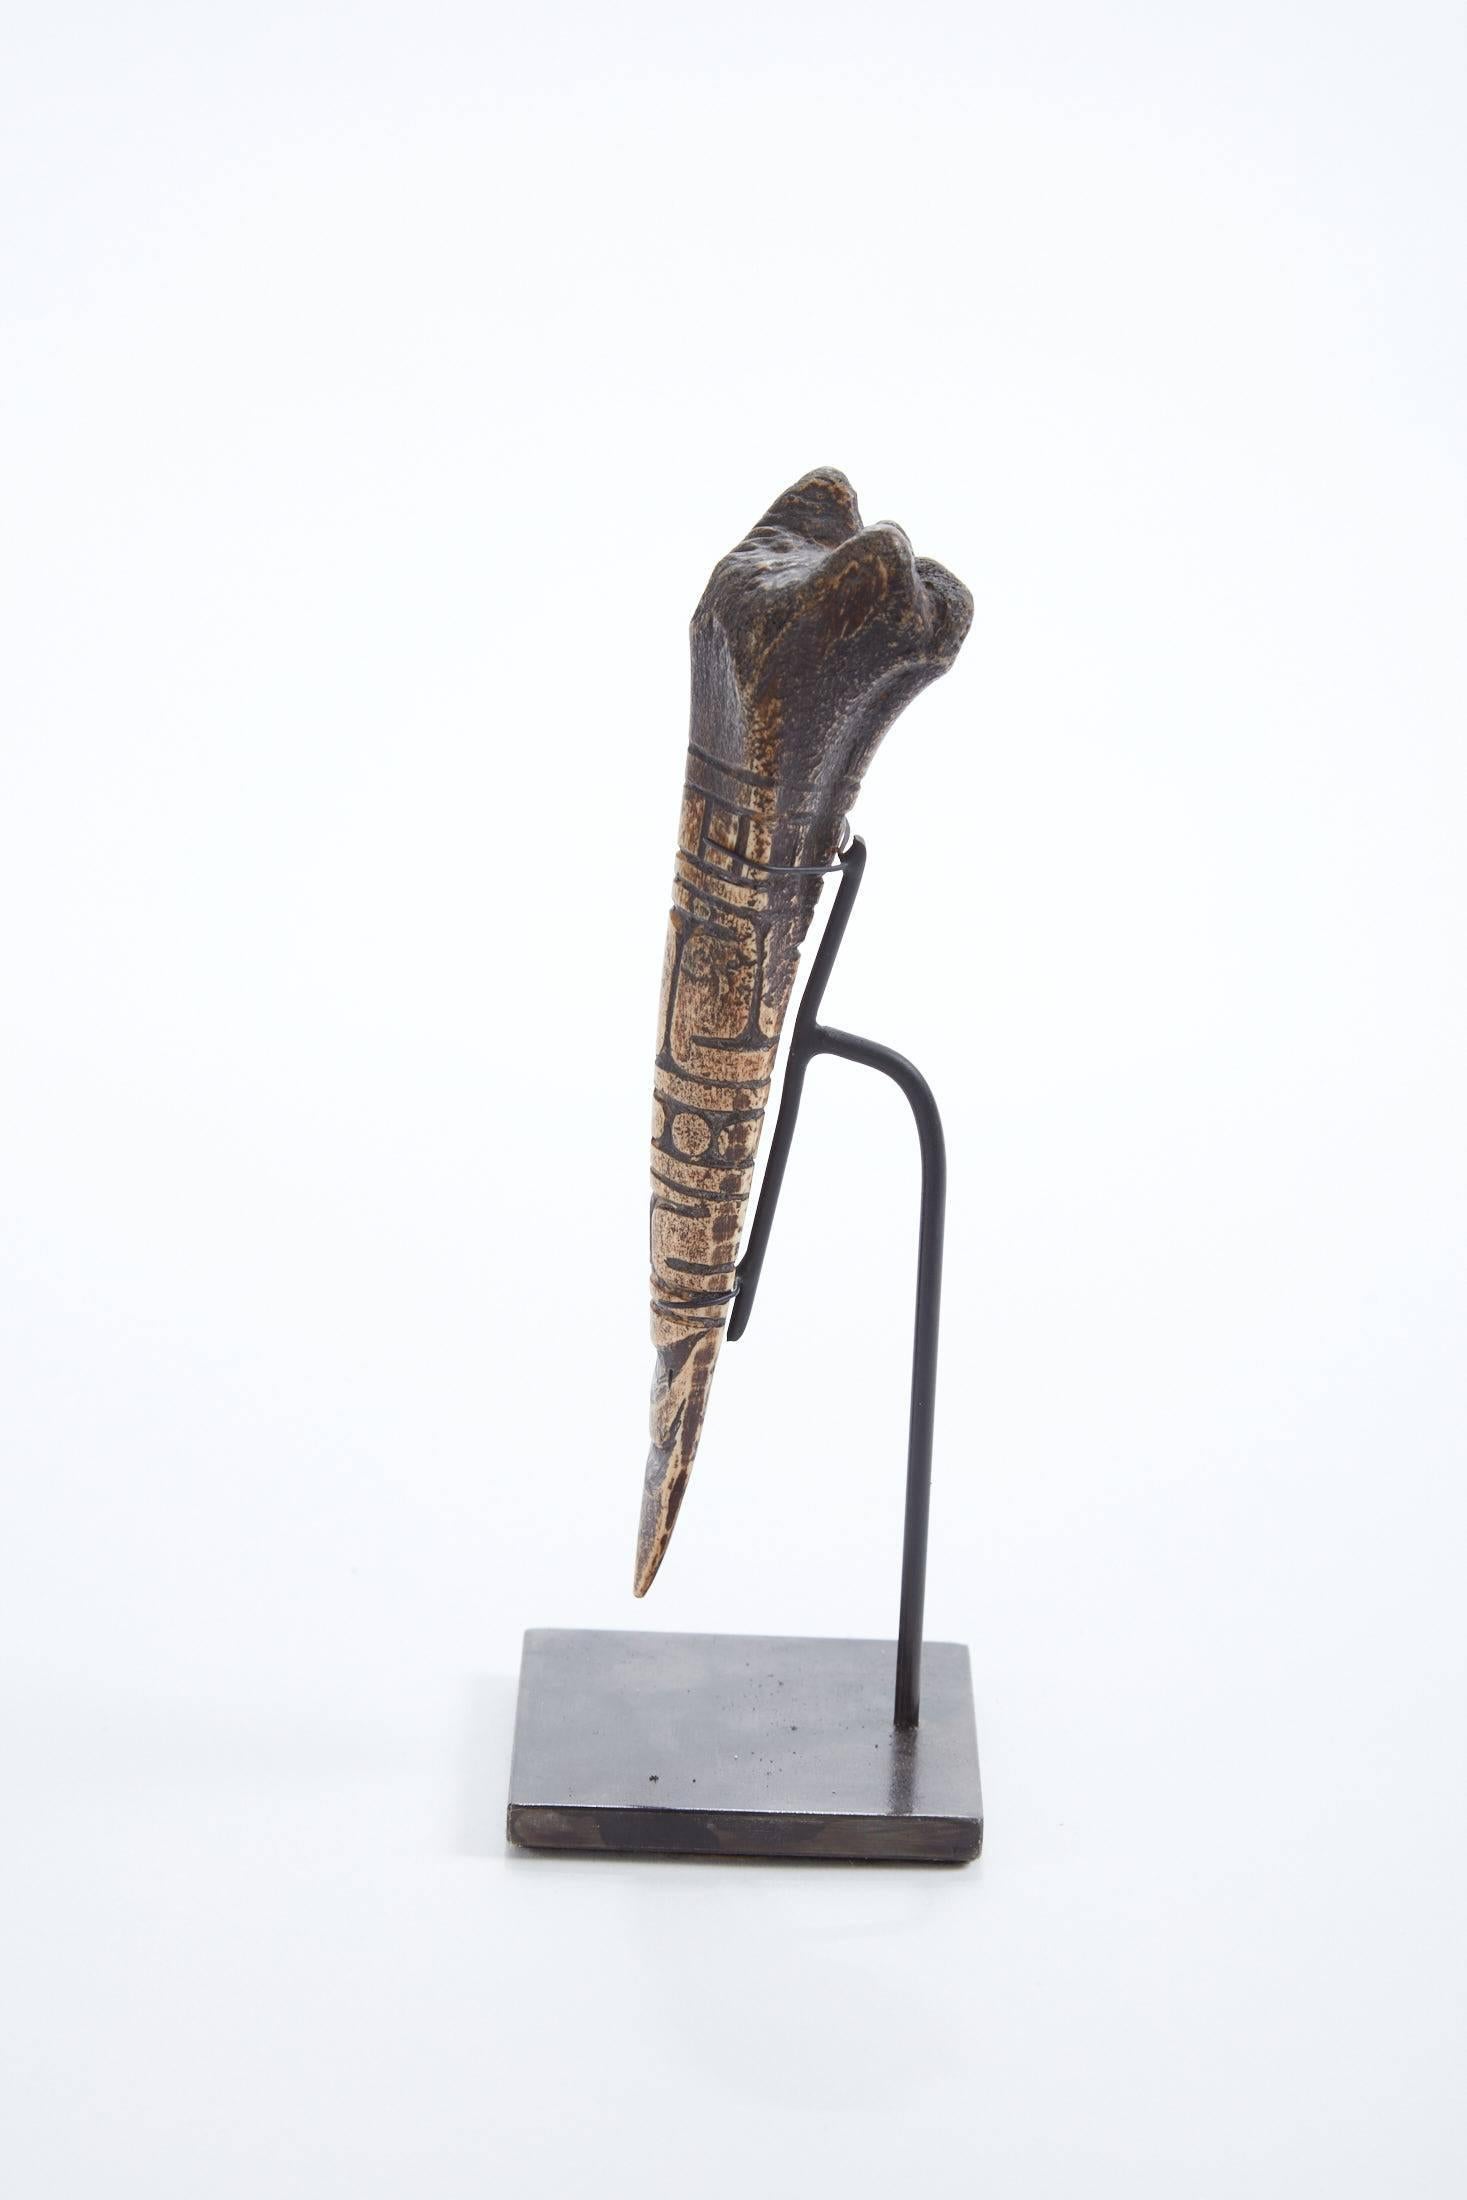 Old primitive small bone carved tool from
Cameroon
Beautiful and delicate Objet d' Art.